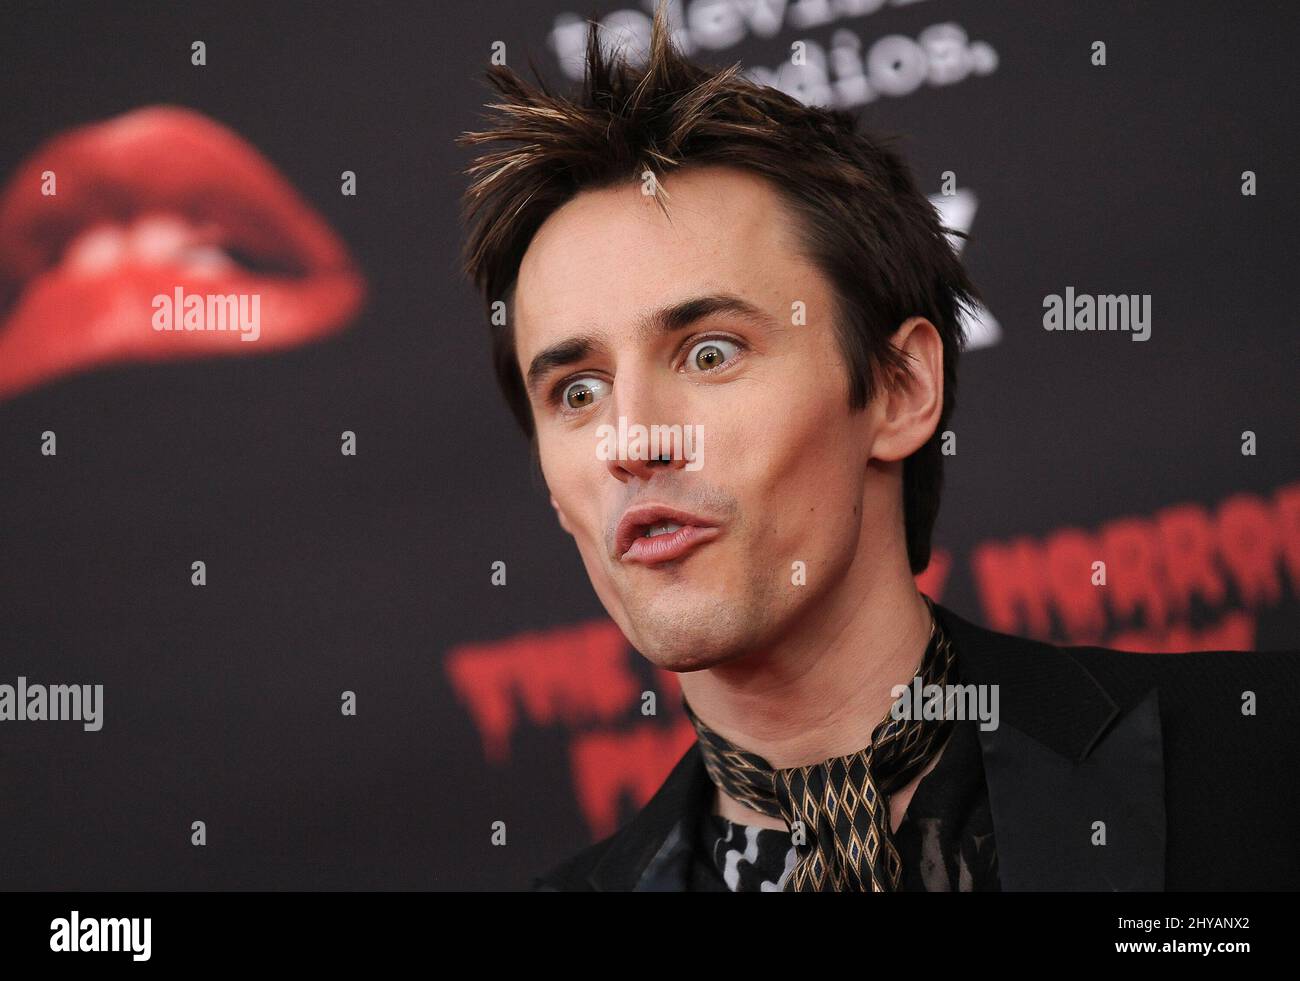 Reeve Carney attending the Rocky Horror Picture Show: Let's Do The Time Warp Again Premiere held at The Roxy, in Los Angeles, California. Stock Photo